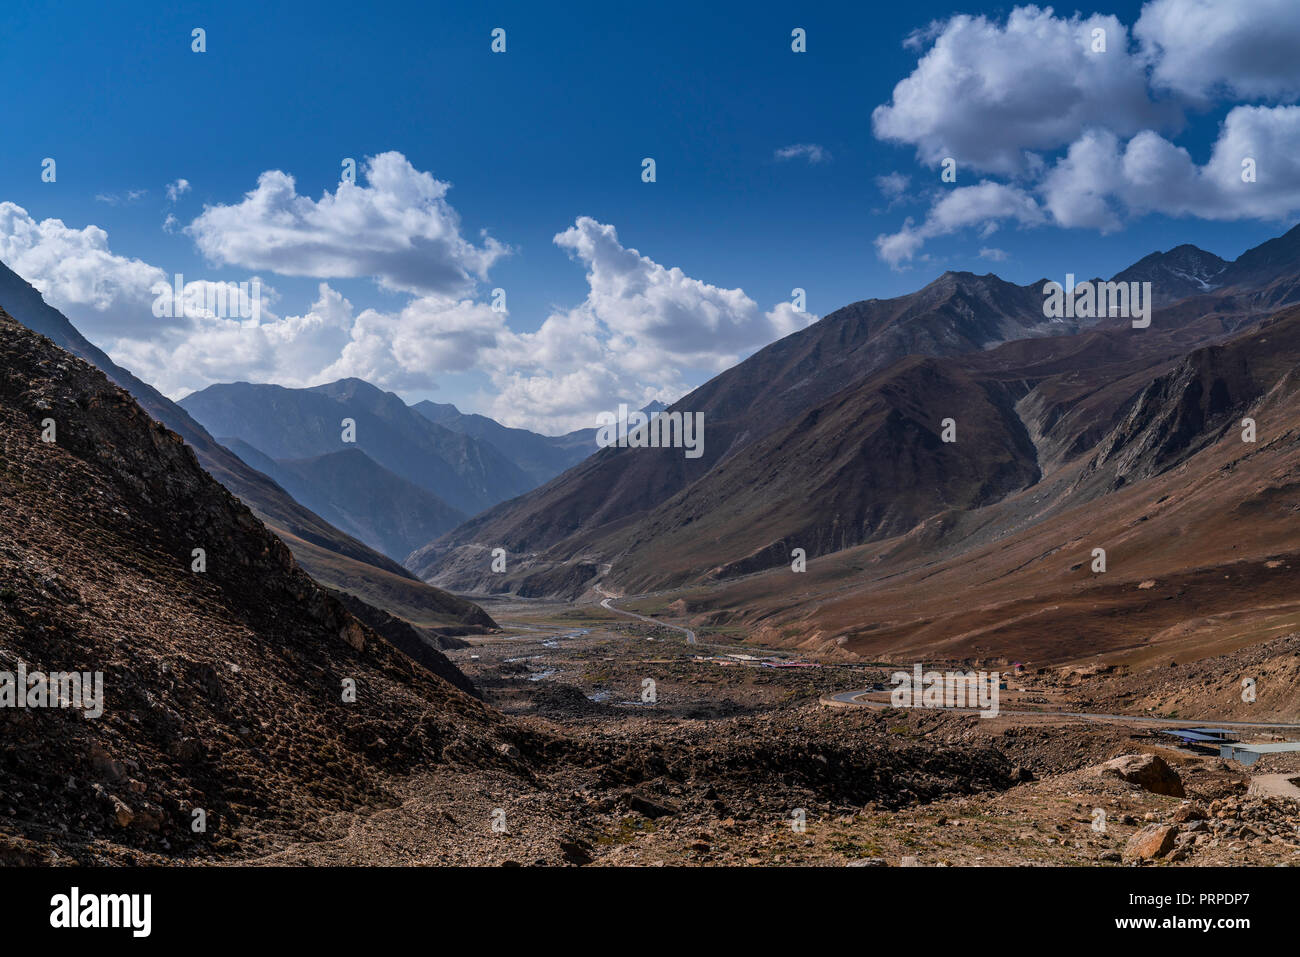 Tourism and travel in the north of Pakistan, Naran, through the Karakoram highway, saif ul mulook, babusar, gilgit, hunza, are areas along the route. Stock Photo